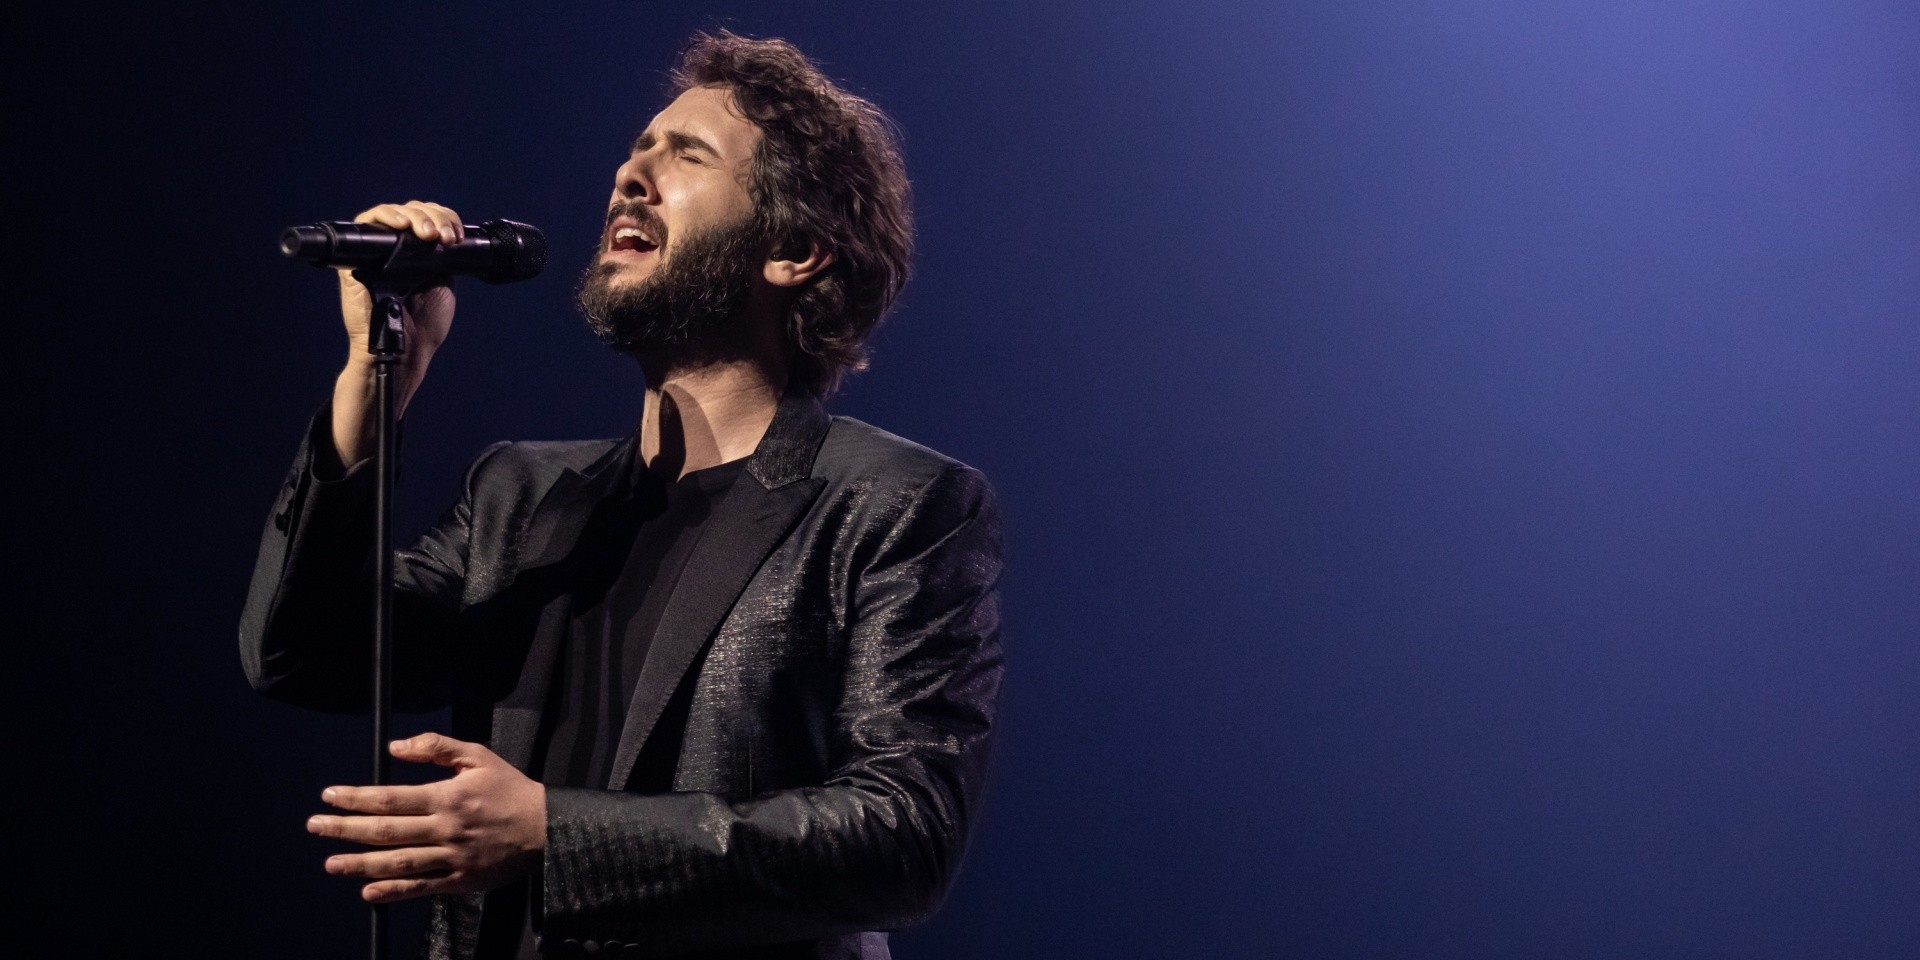 Josh Groban's debut show in Singapore was a transformative experience – gig review